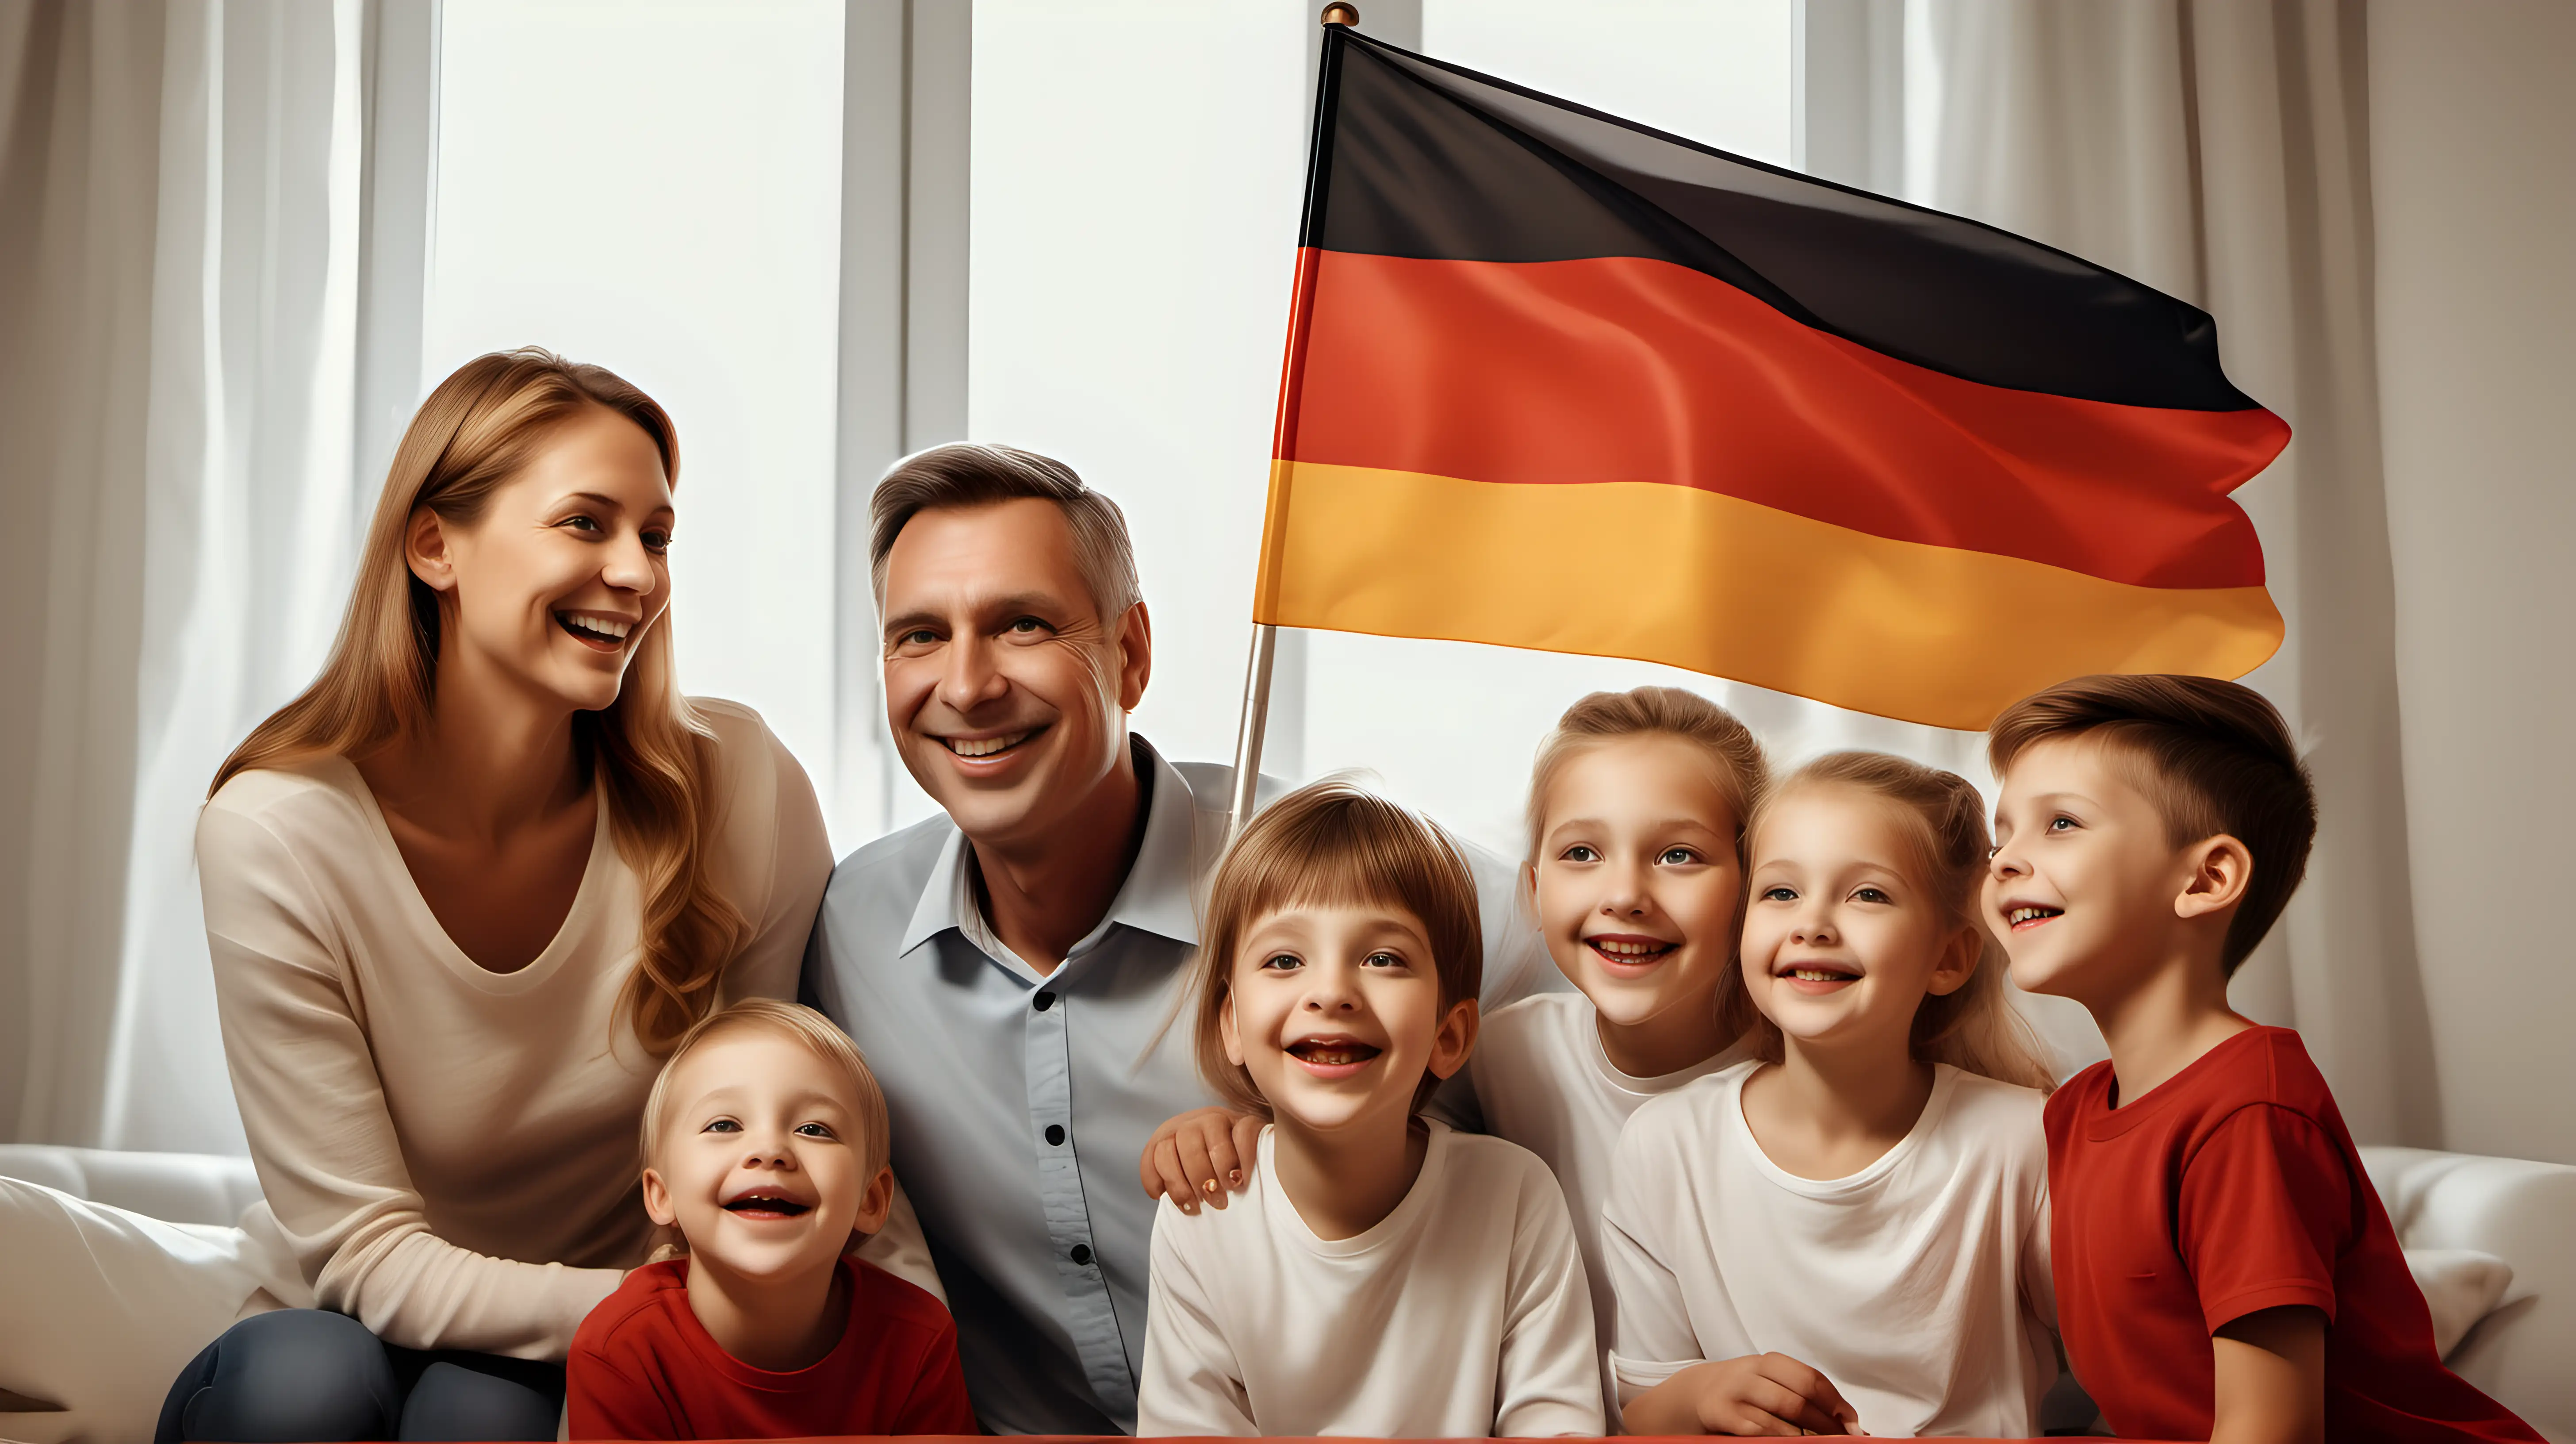 Illustrate a family gathered around a German flag during a national holiday, with smiles and expressions of unity, highlighting the importance of patriotism in the household.